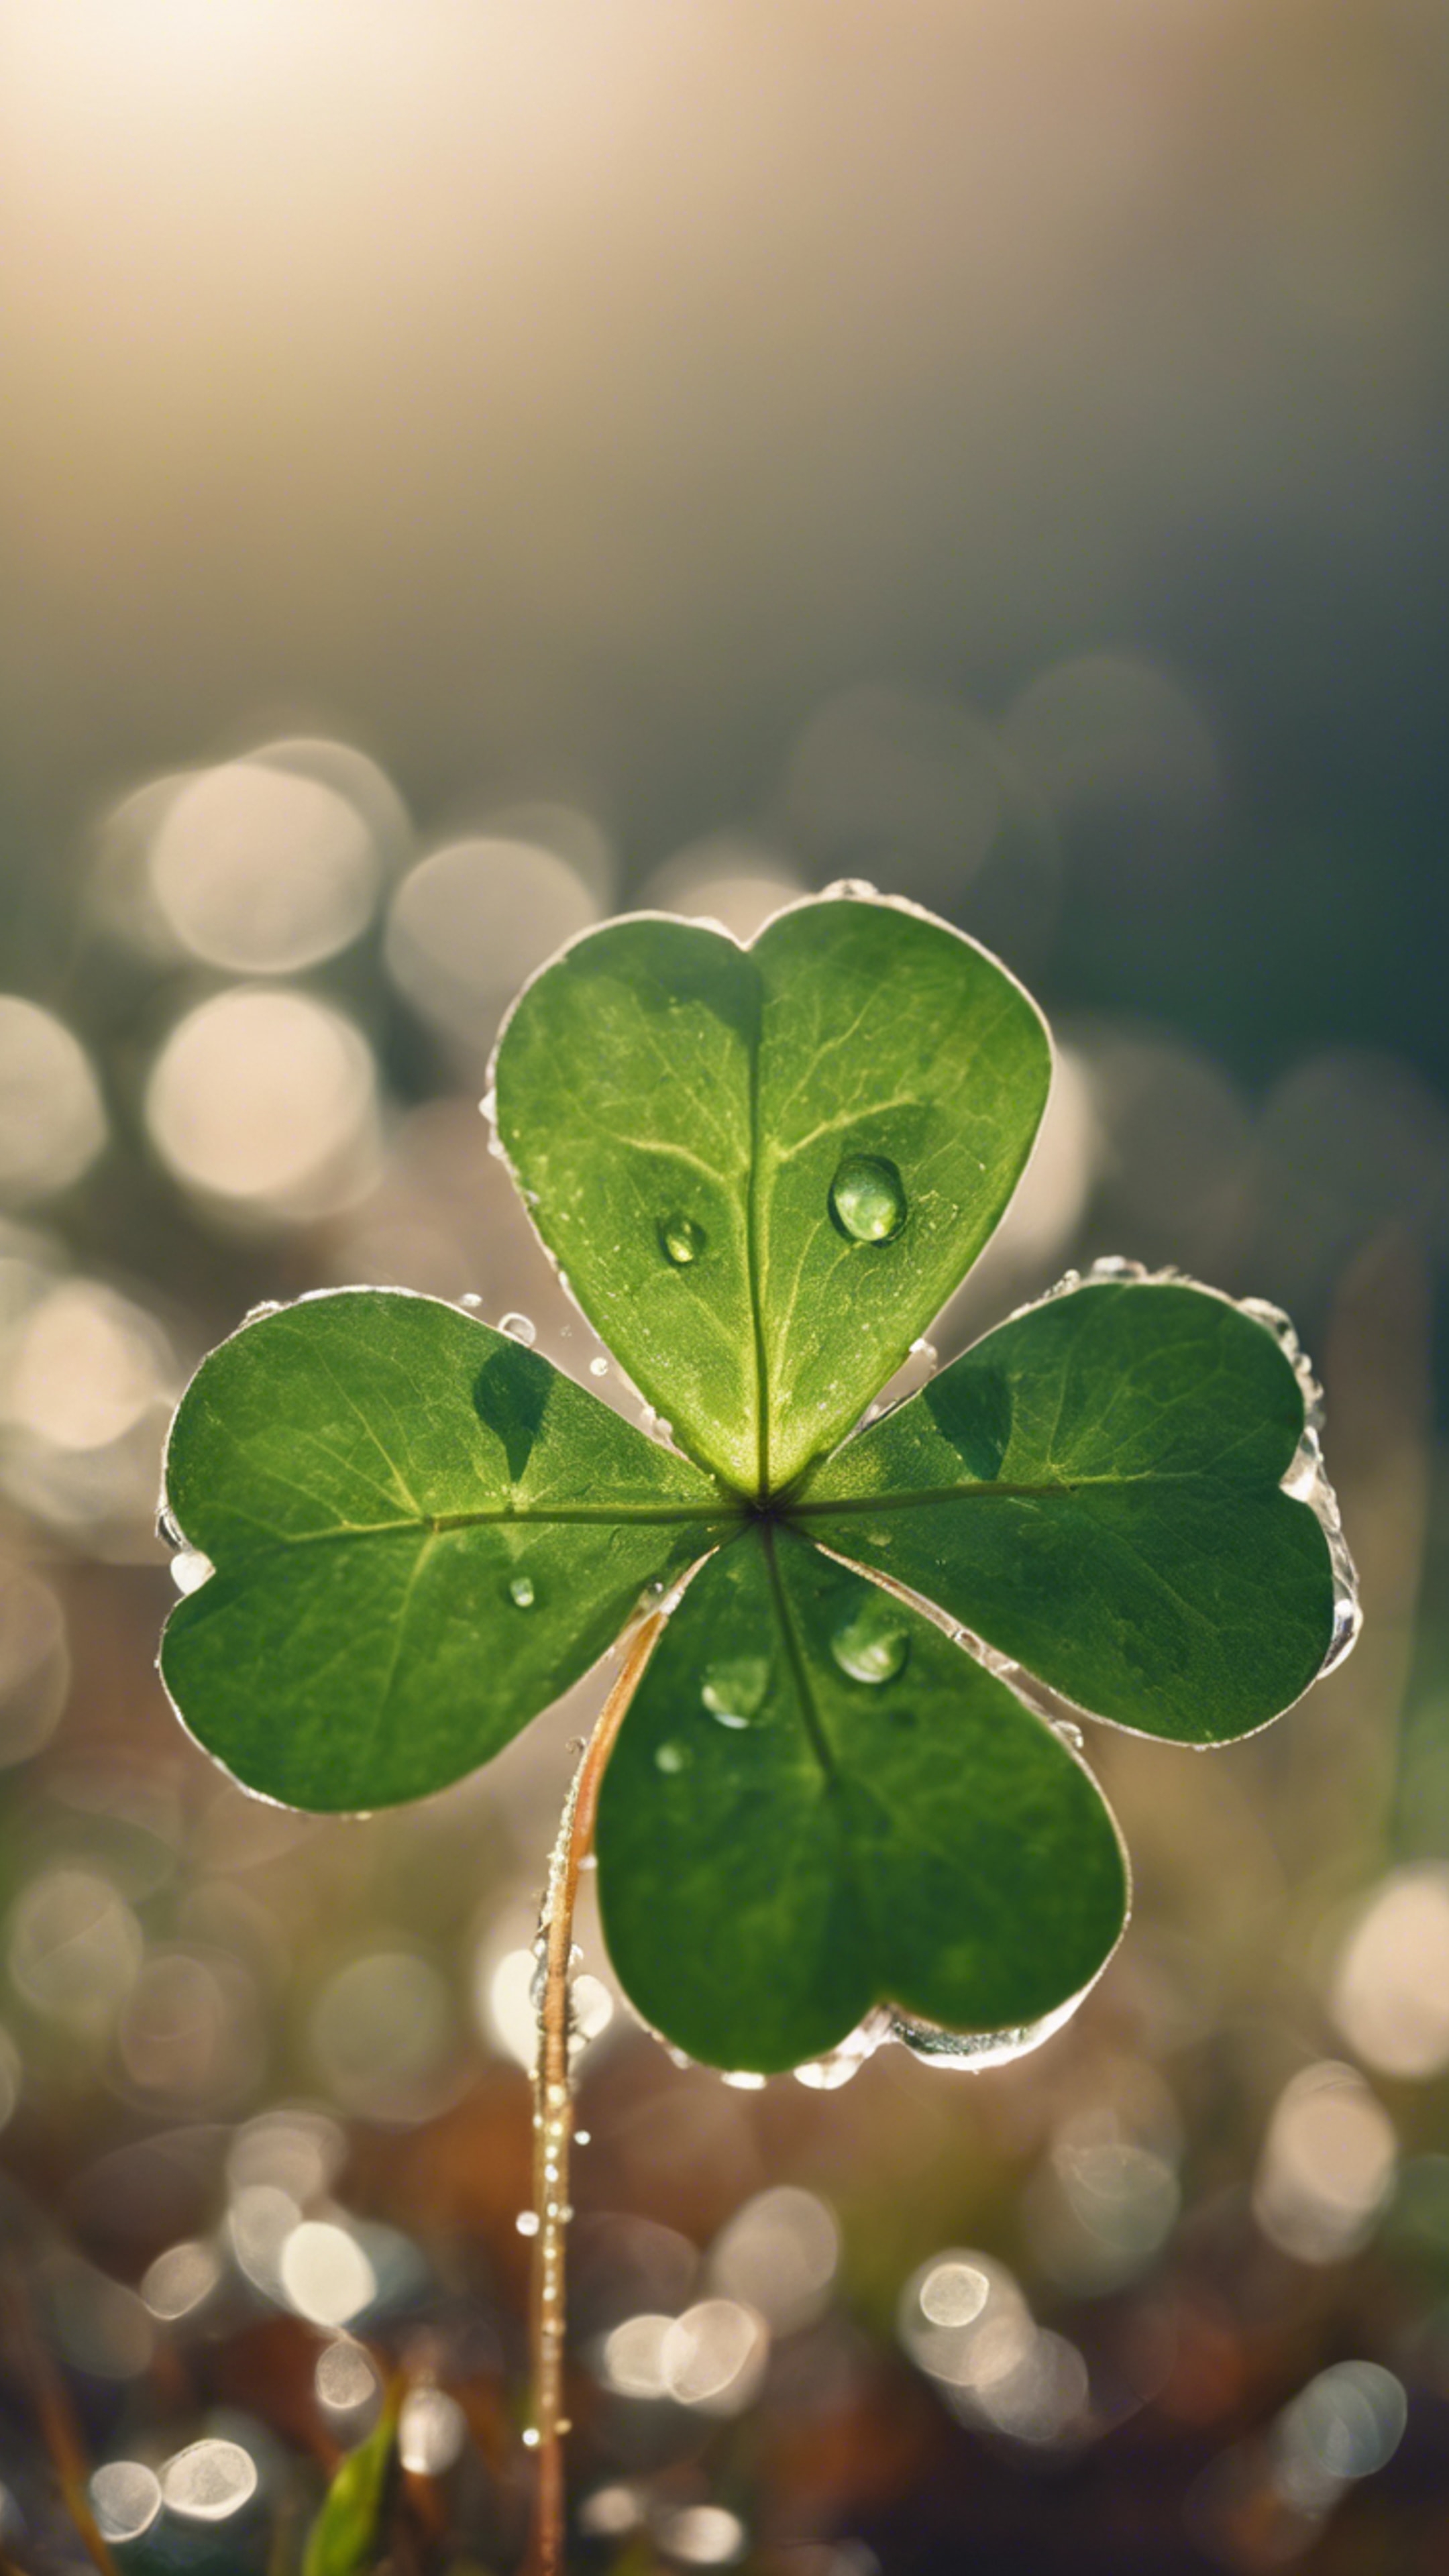 A close-up view of a four leaf clover gleaming in the morning dew. Tapéta[b8d84a1222284df192e8]